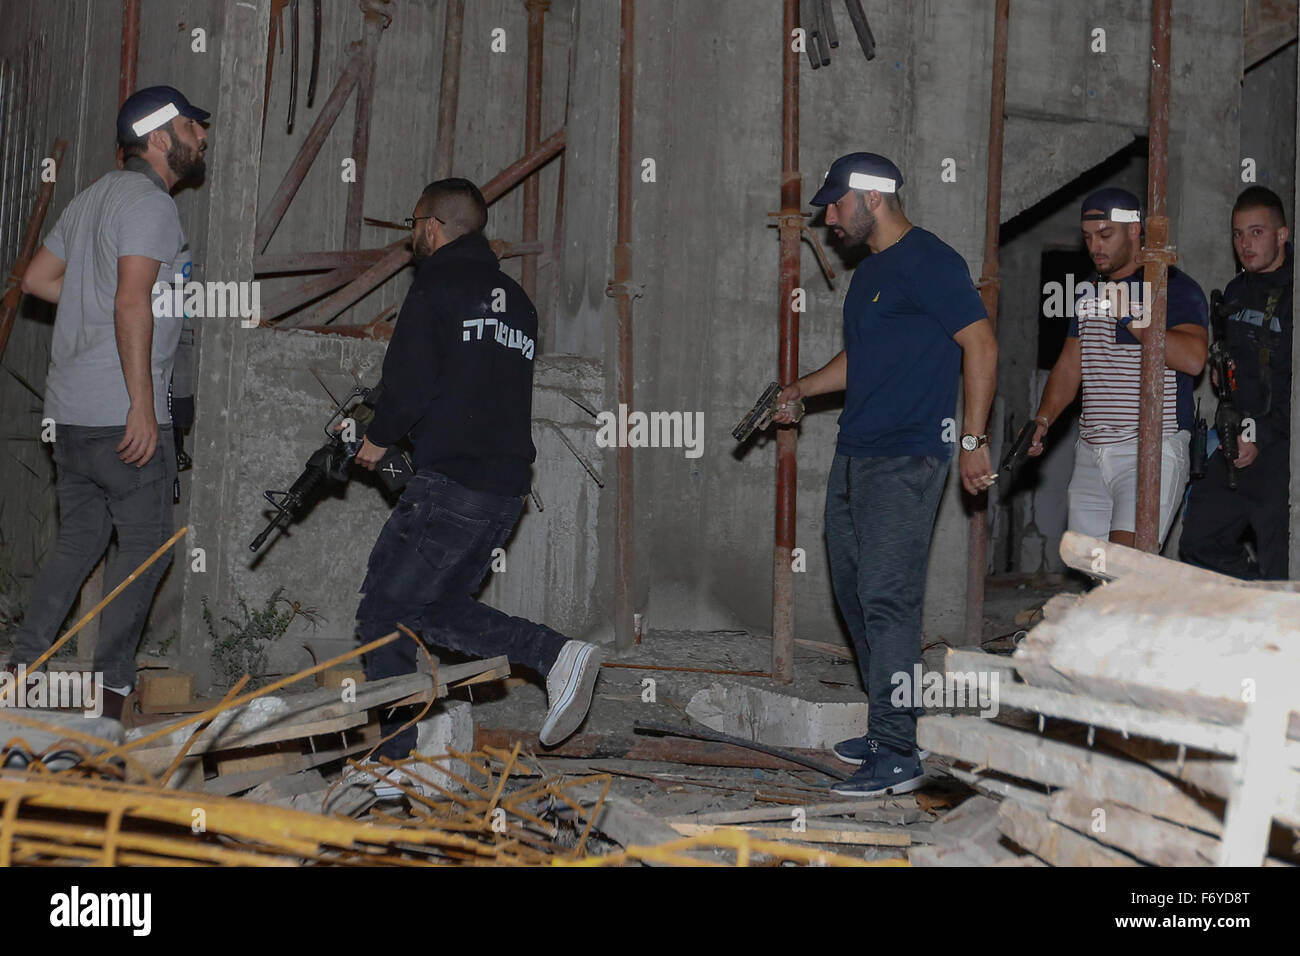 Jerusalem, Israel. 21st Nov, 2015. Israeli policemen search for a Palestinian attacker at a construction site in Kiryat Gat, southern Israel, on Nov. 21, 2015. A suspected terrorist stabbed and wounded four Israelis on Saturday evening in southern Israel, including a 13-year-old girl, before fleeing the scene, triggering a large manhunt, police said. Credit:  JINI/Yehuda Peretz/Xinhua/Alamy Live News Stock Photo